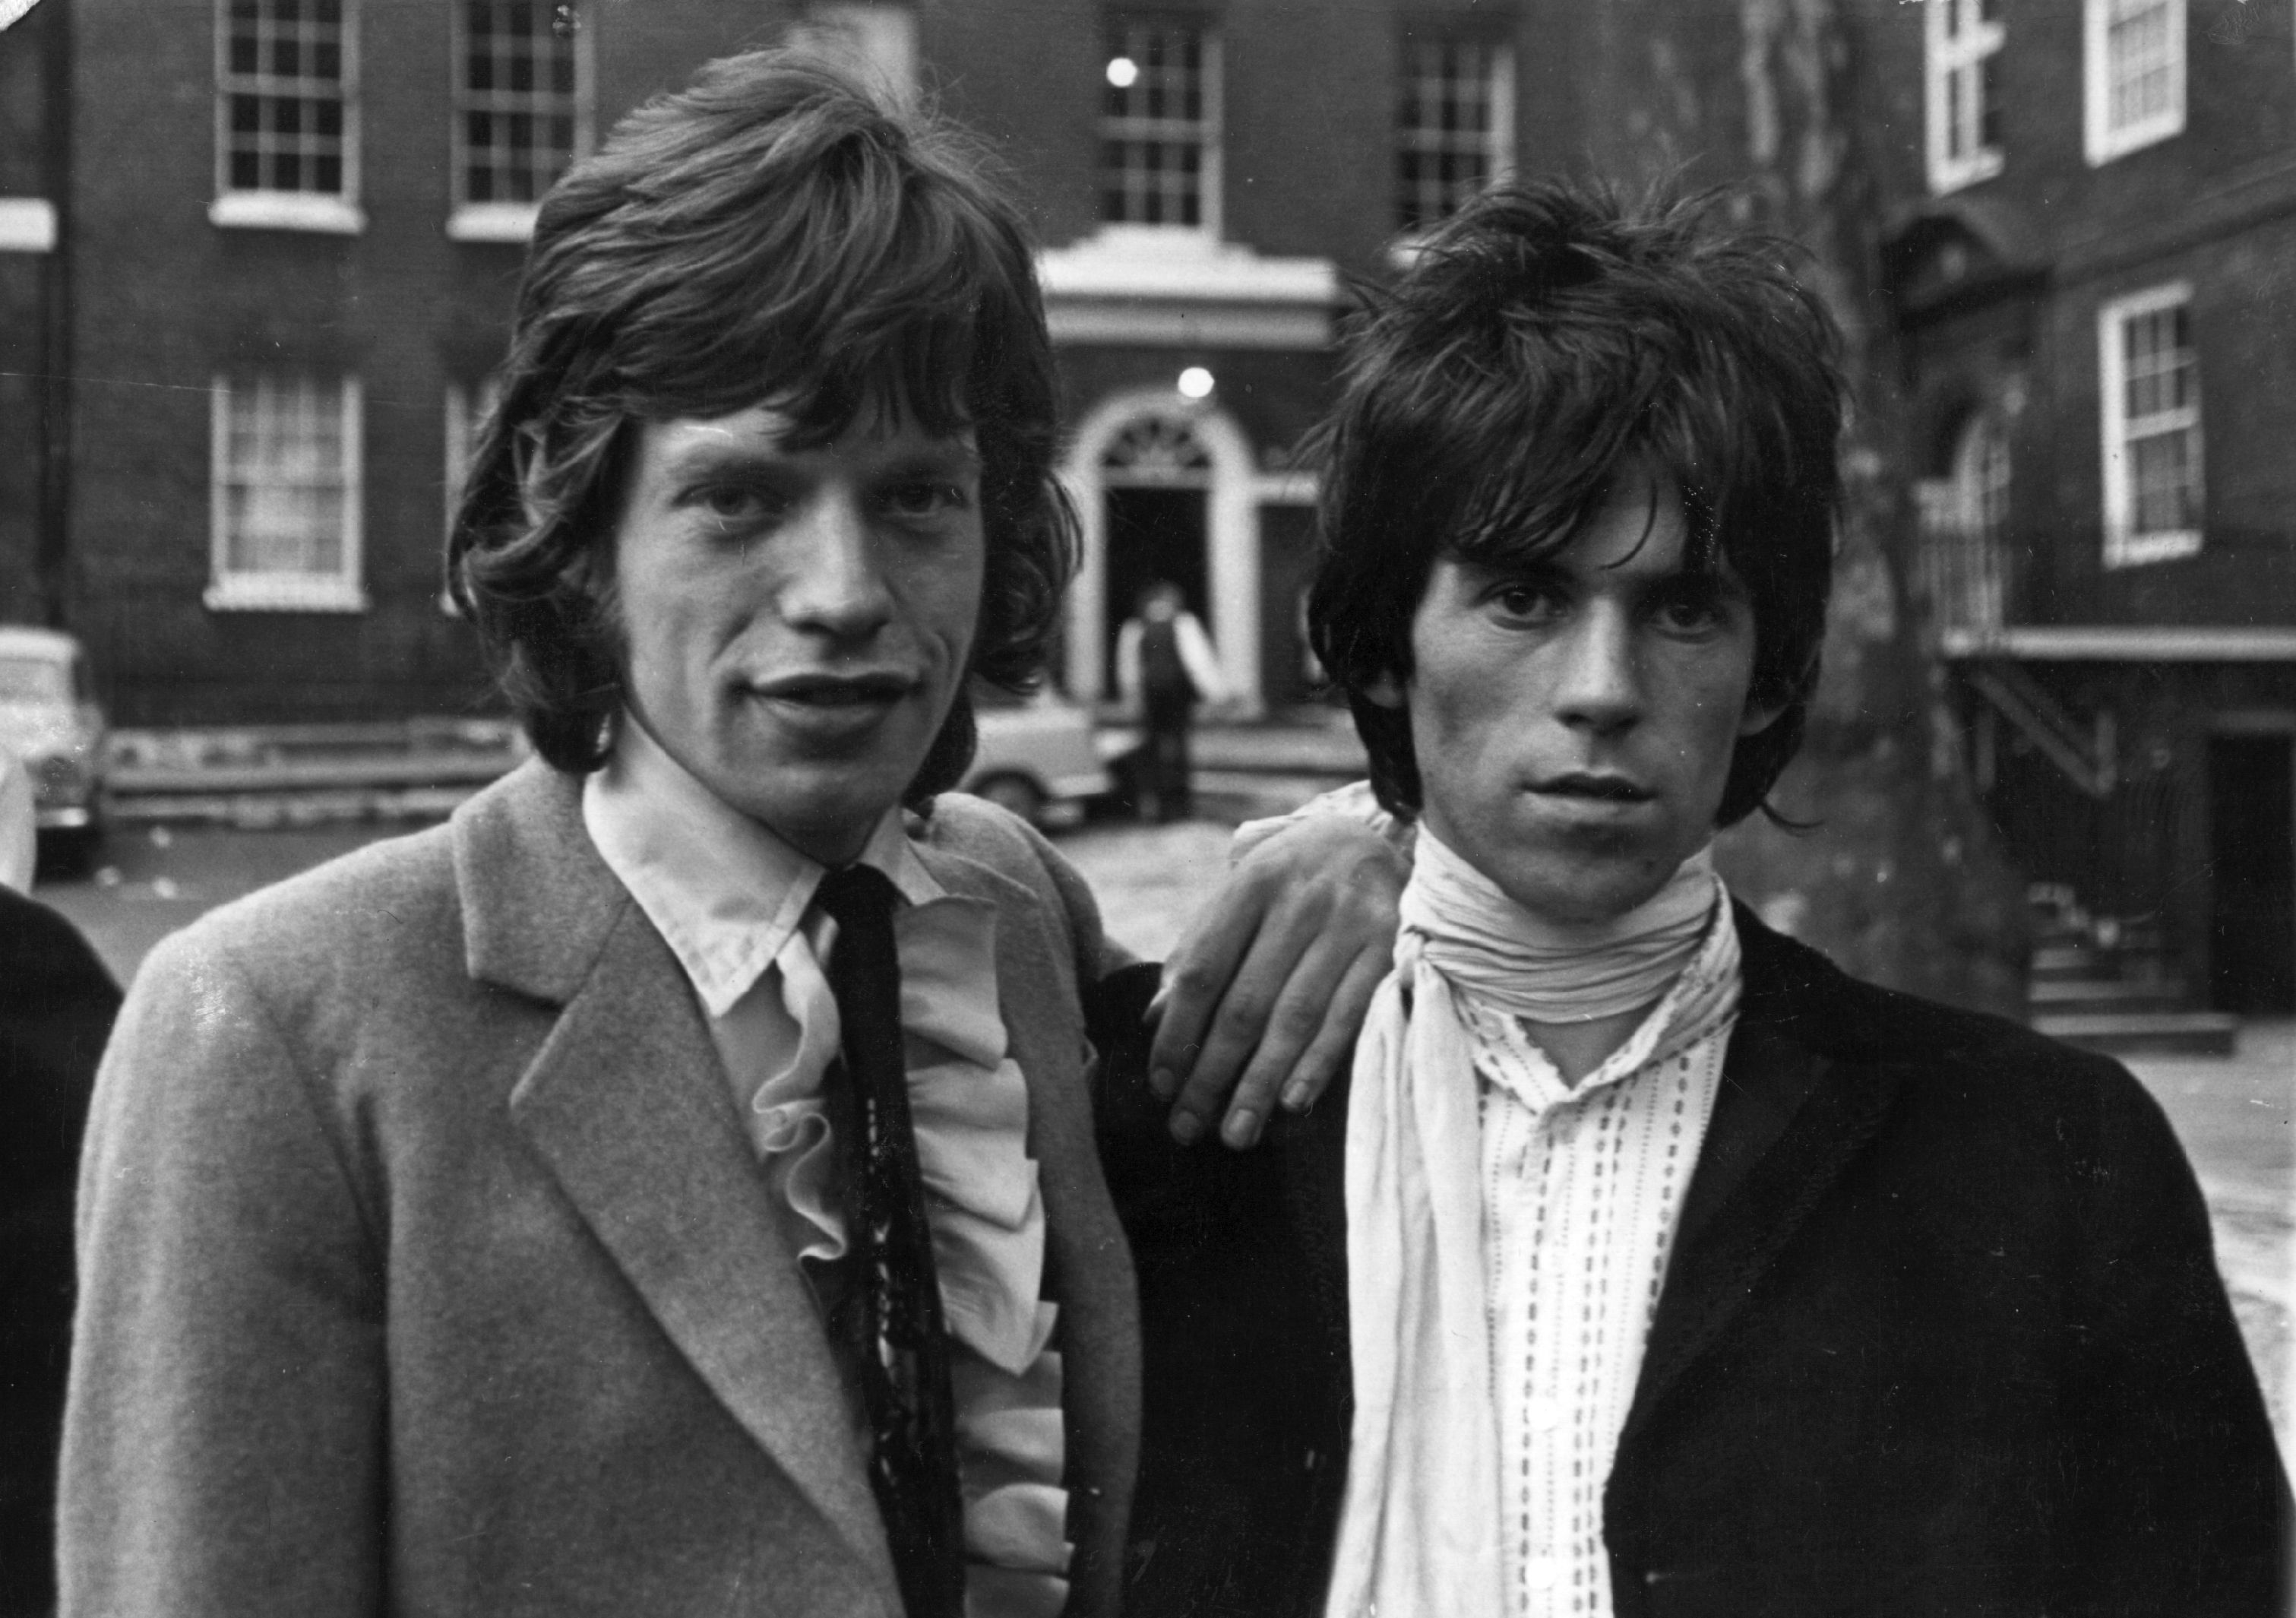 The Rolling Stones' Mick Jagger  and Keith Richards wearing suit jackets